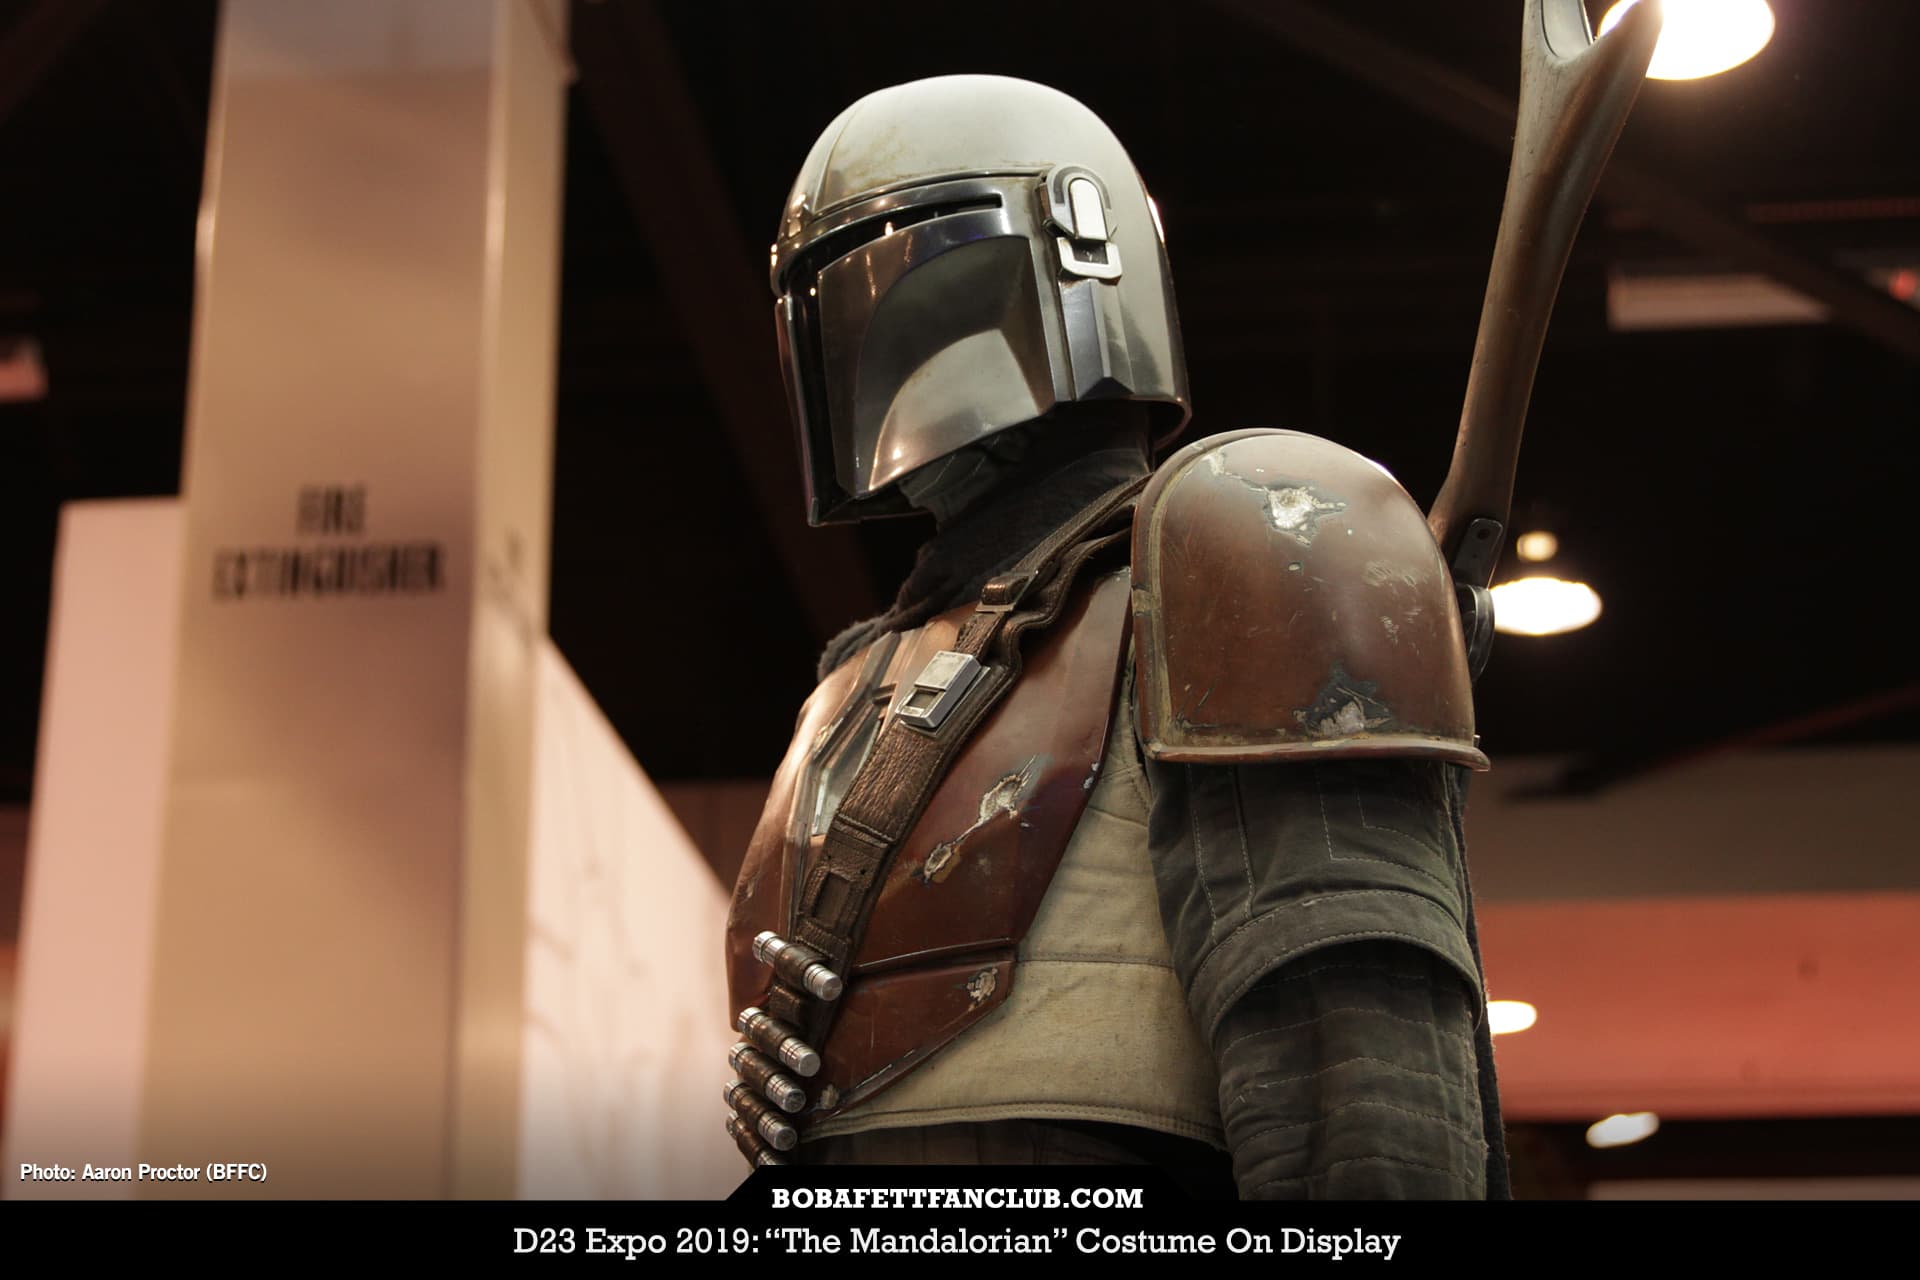 D23 Expo 2019: “The Mandalorian” Costume on Display